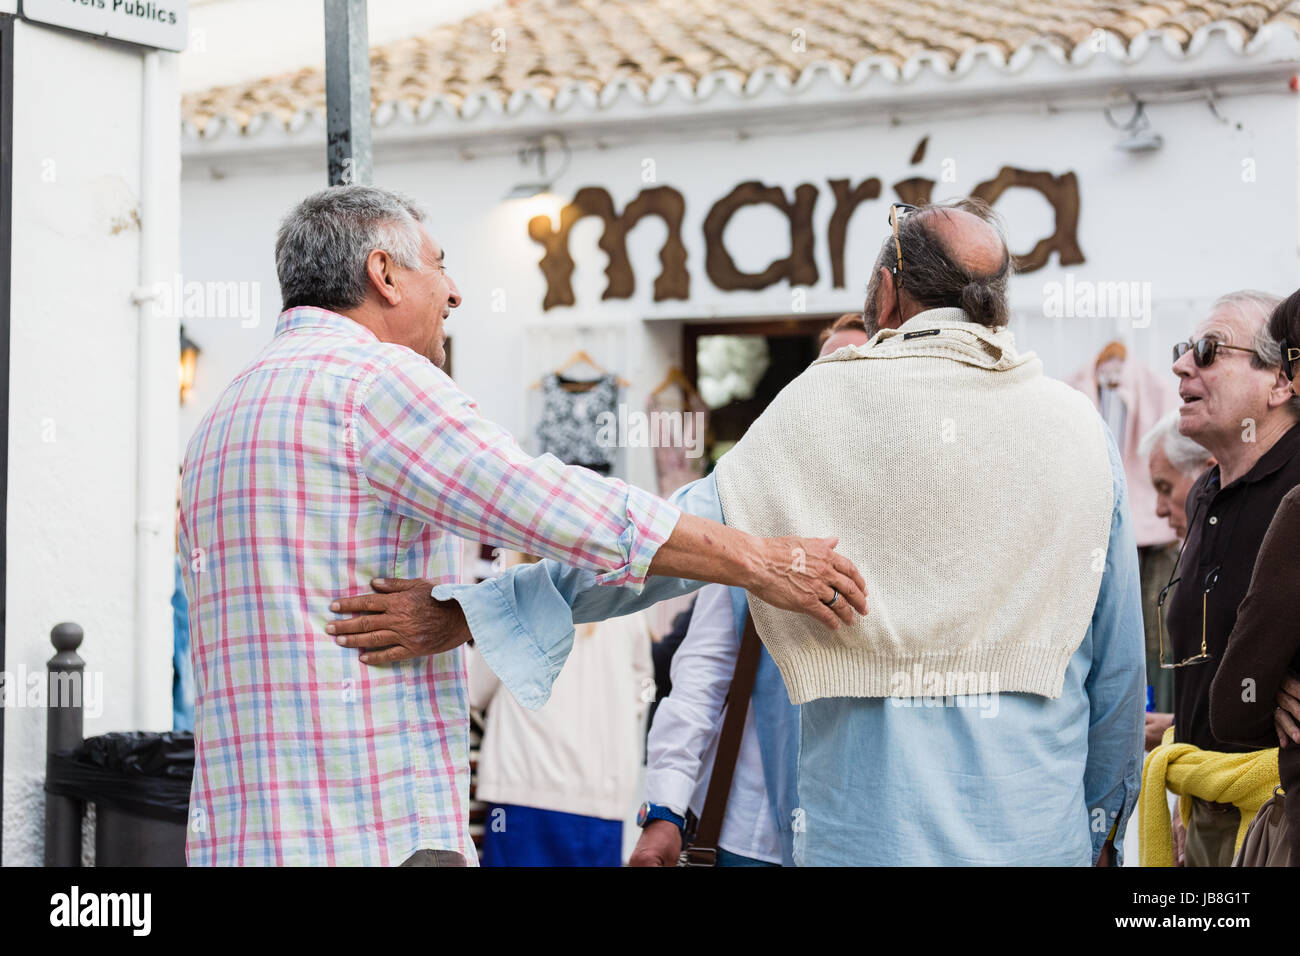 Two old men in contact with their arms, happy, showing their friendship Stock Photo